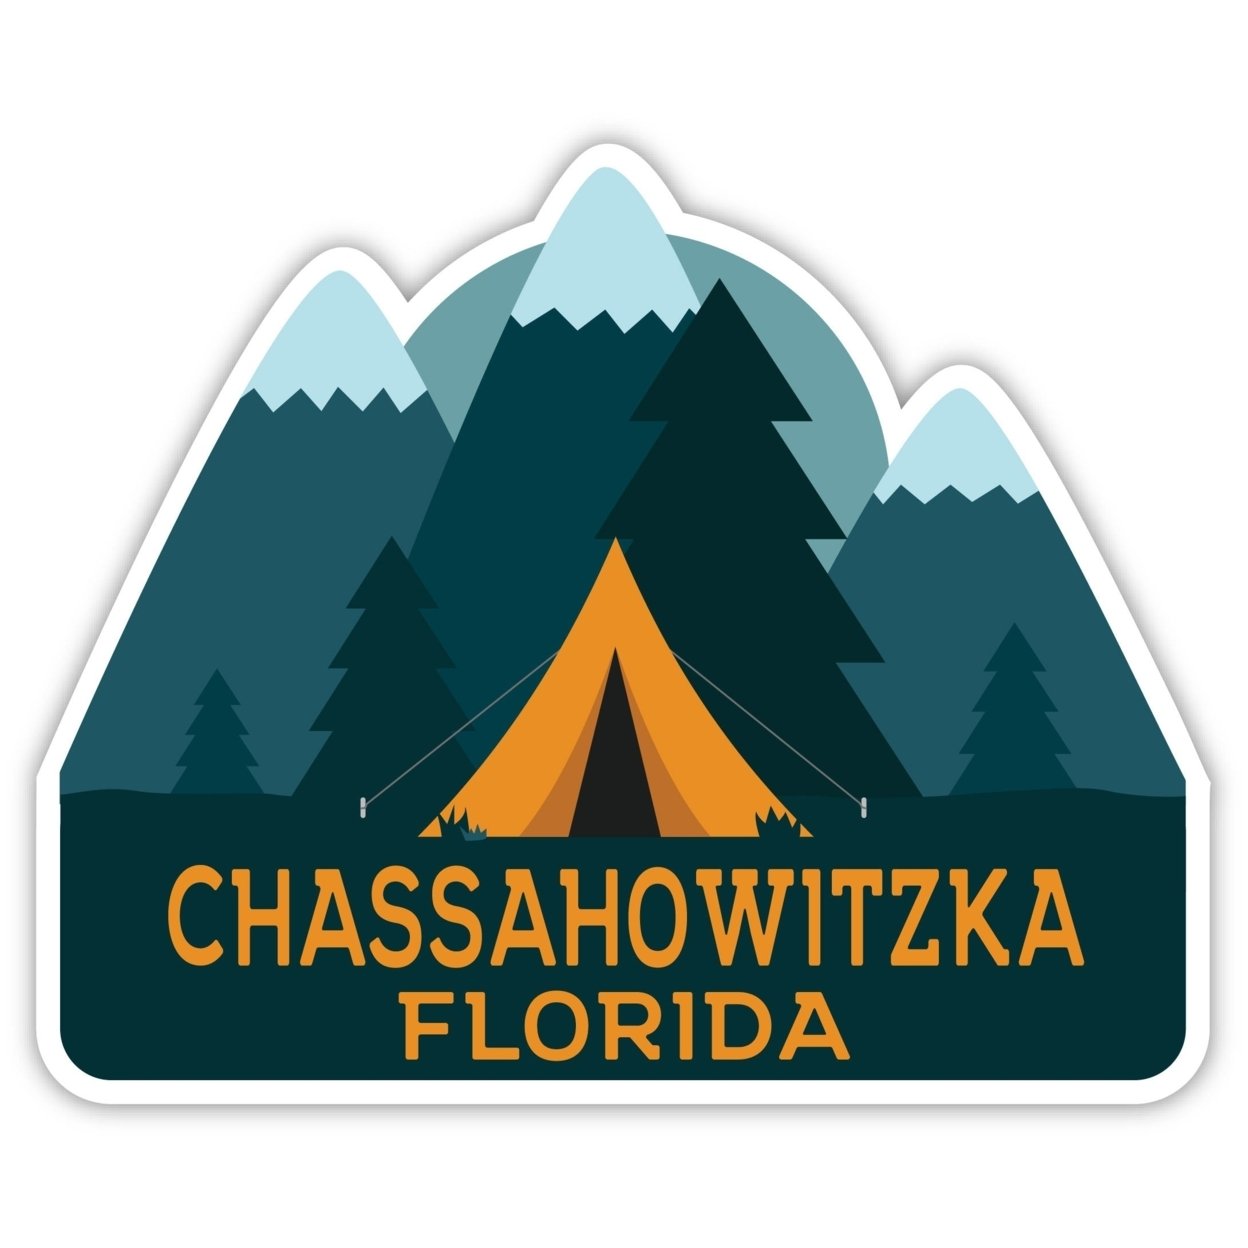 Chassahowitzka Florida Souvenir Decorative Stickers (Choose Theme And Size) - 4-Pack, 4-Inch, Tent